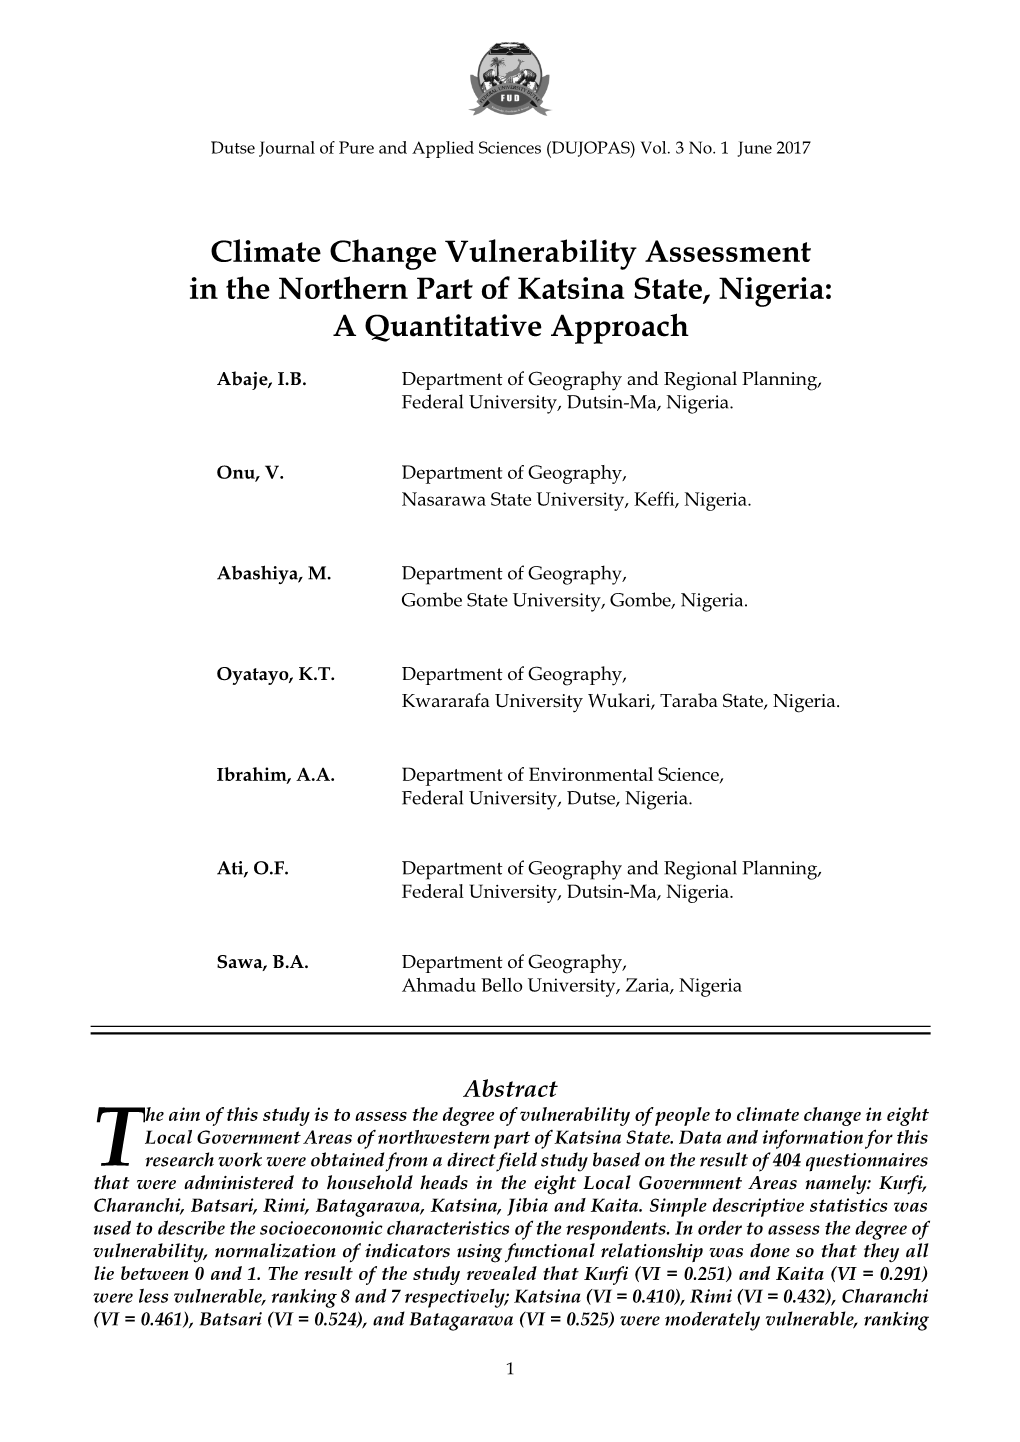 Climate Change Vulnerability Assessment in the Northern Part of Katsina State, Nigeria: a Quantitative Approach